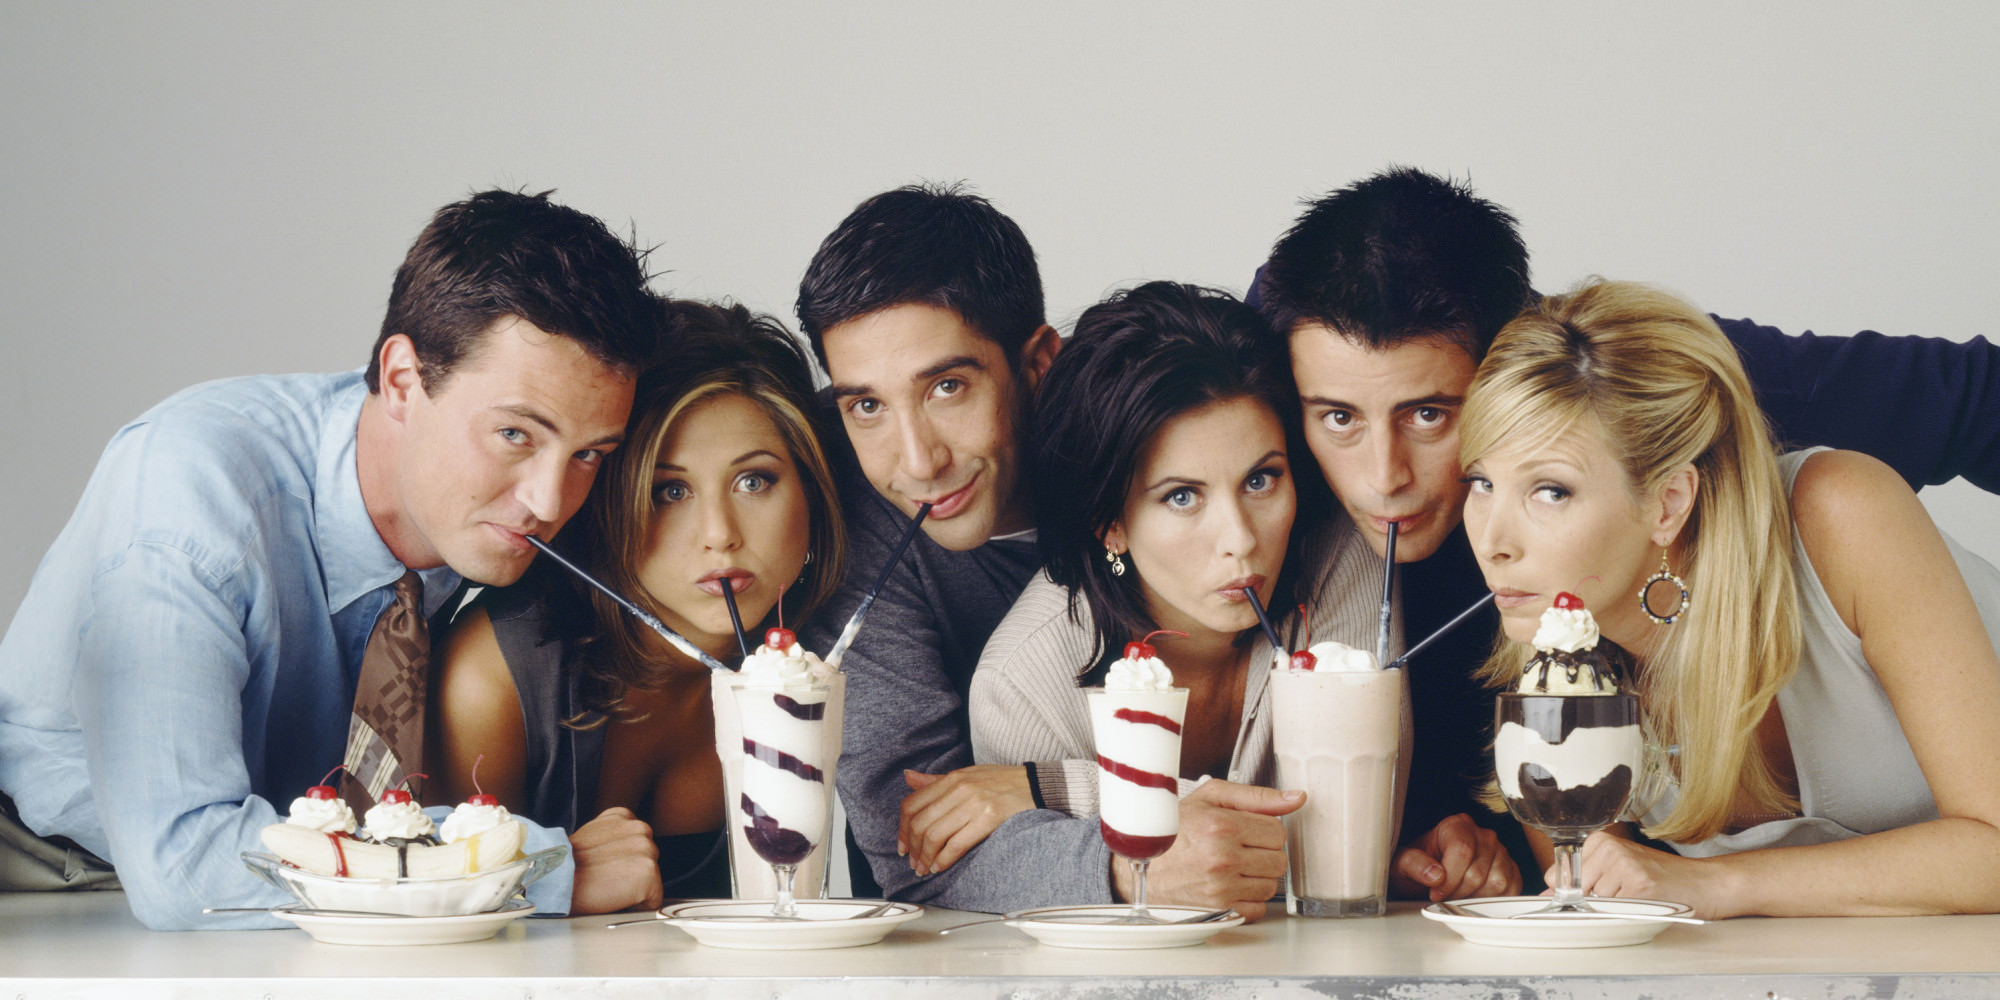 Top 10 Friends Moments From the Show that Will Make You Want to See It Again